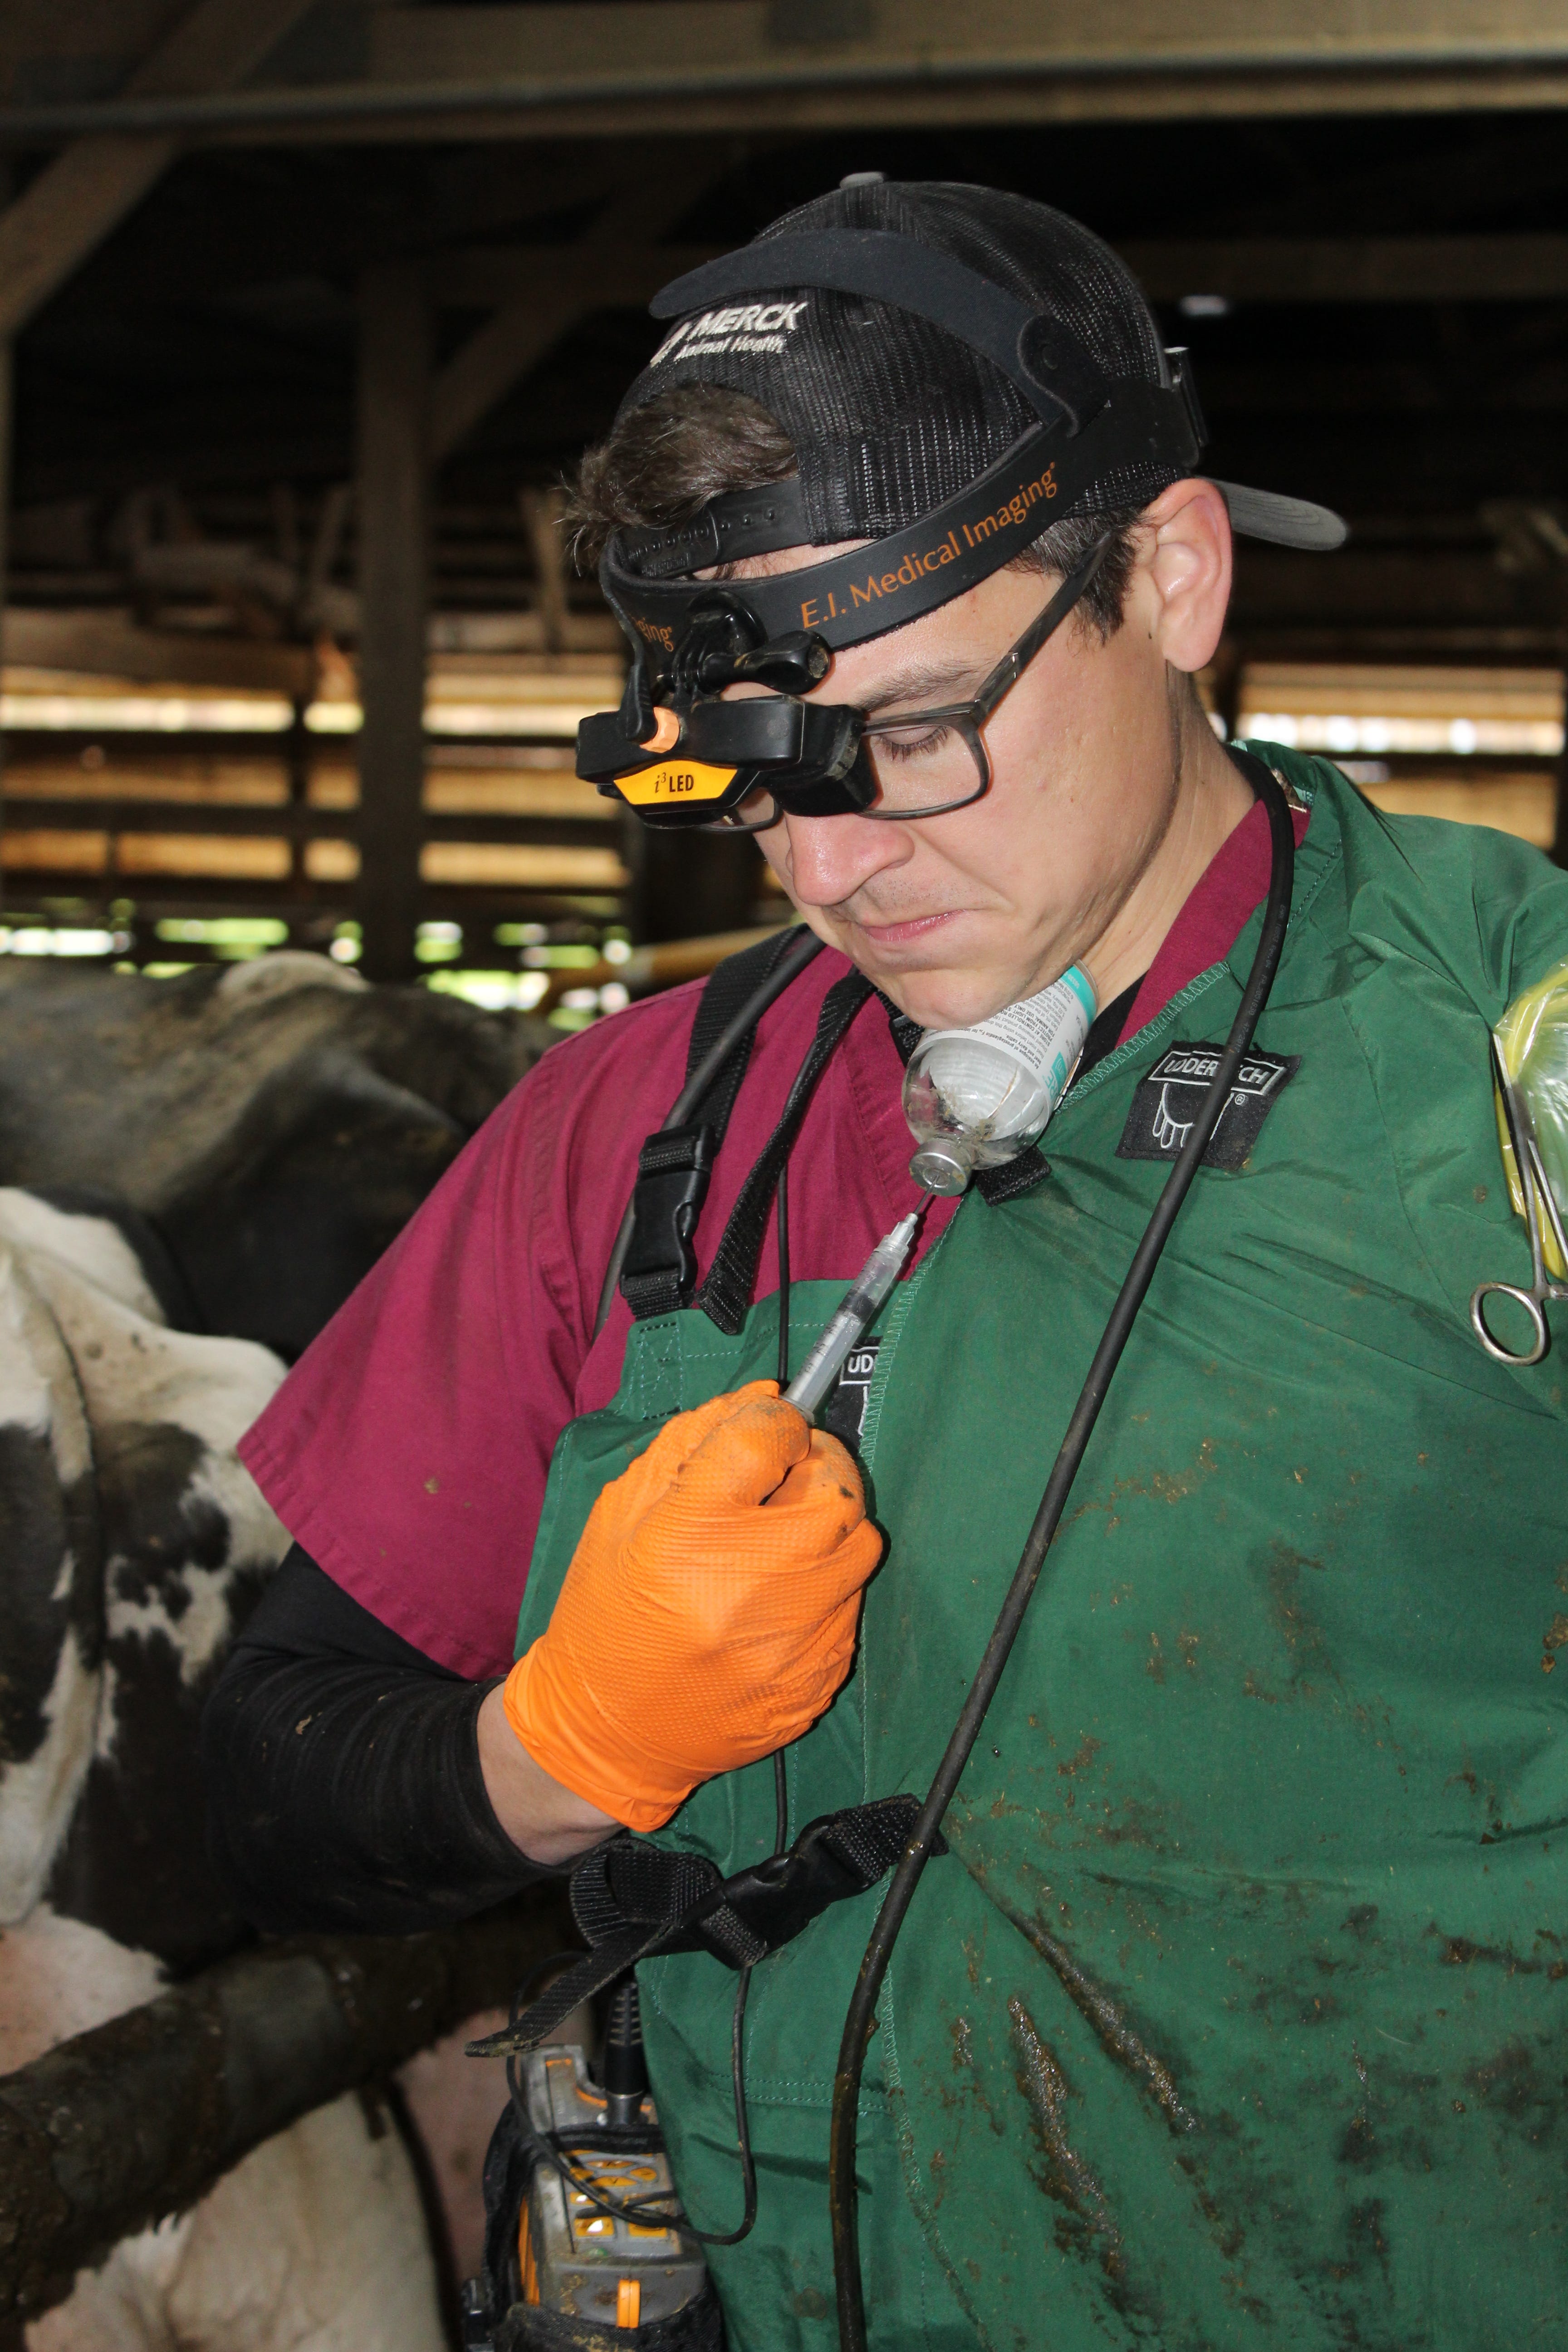 Growing up on the family dairy farm near Sheboygan, Wis., Nick Mayer says his love for cows and veterinary medicine started at a young age while watching their farm vet work on sick cows. At Waupun Veterinary Service, Mayer is able to hone his role in calf and heifer health programs.